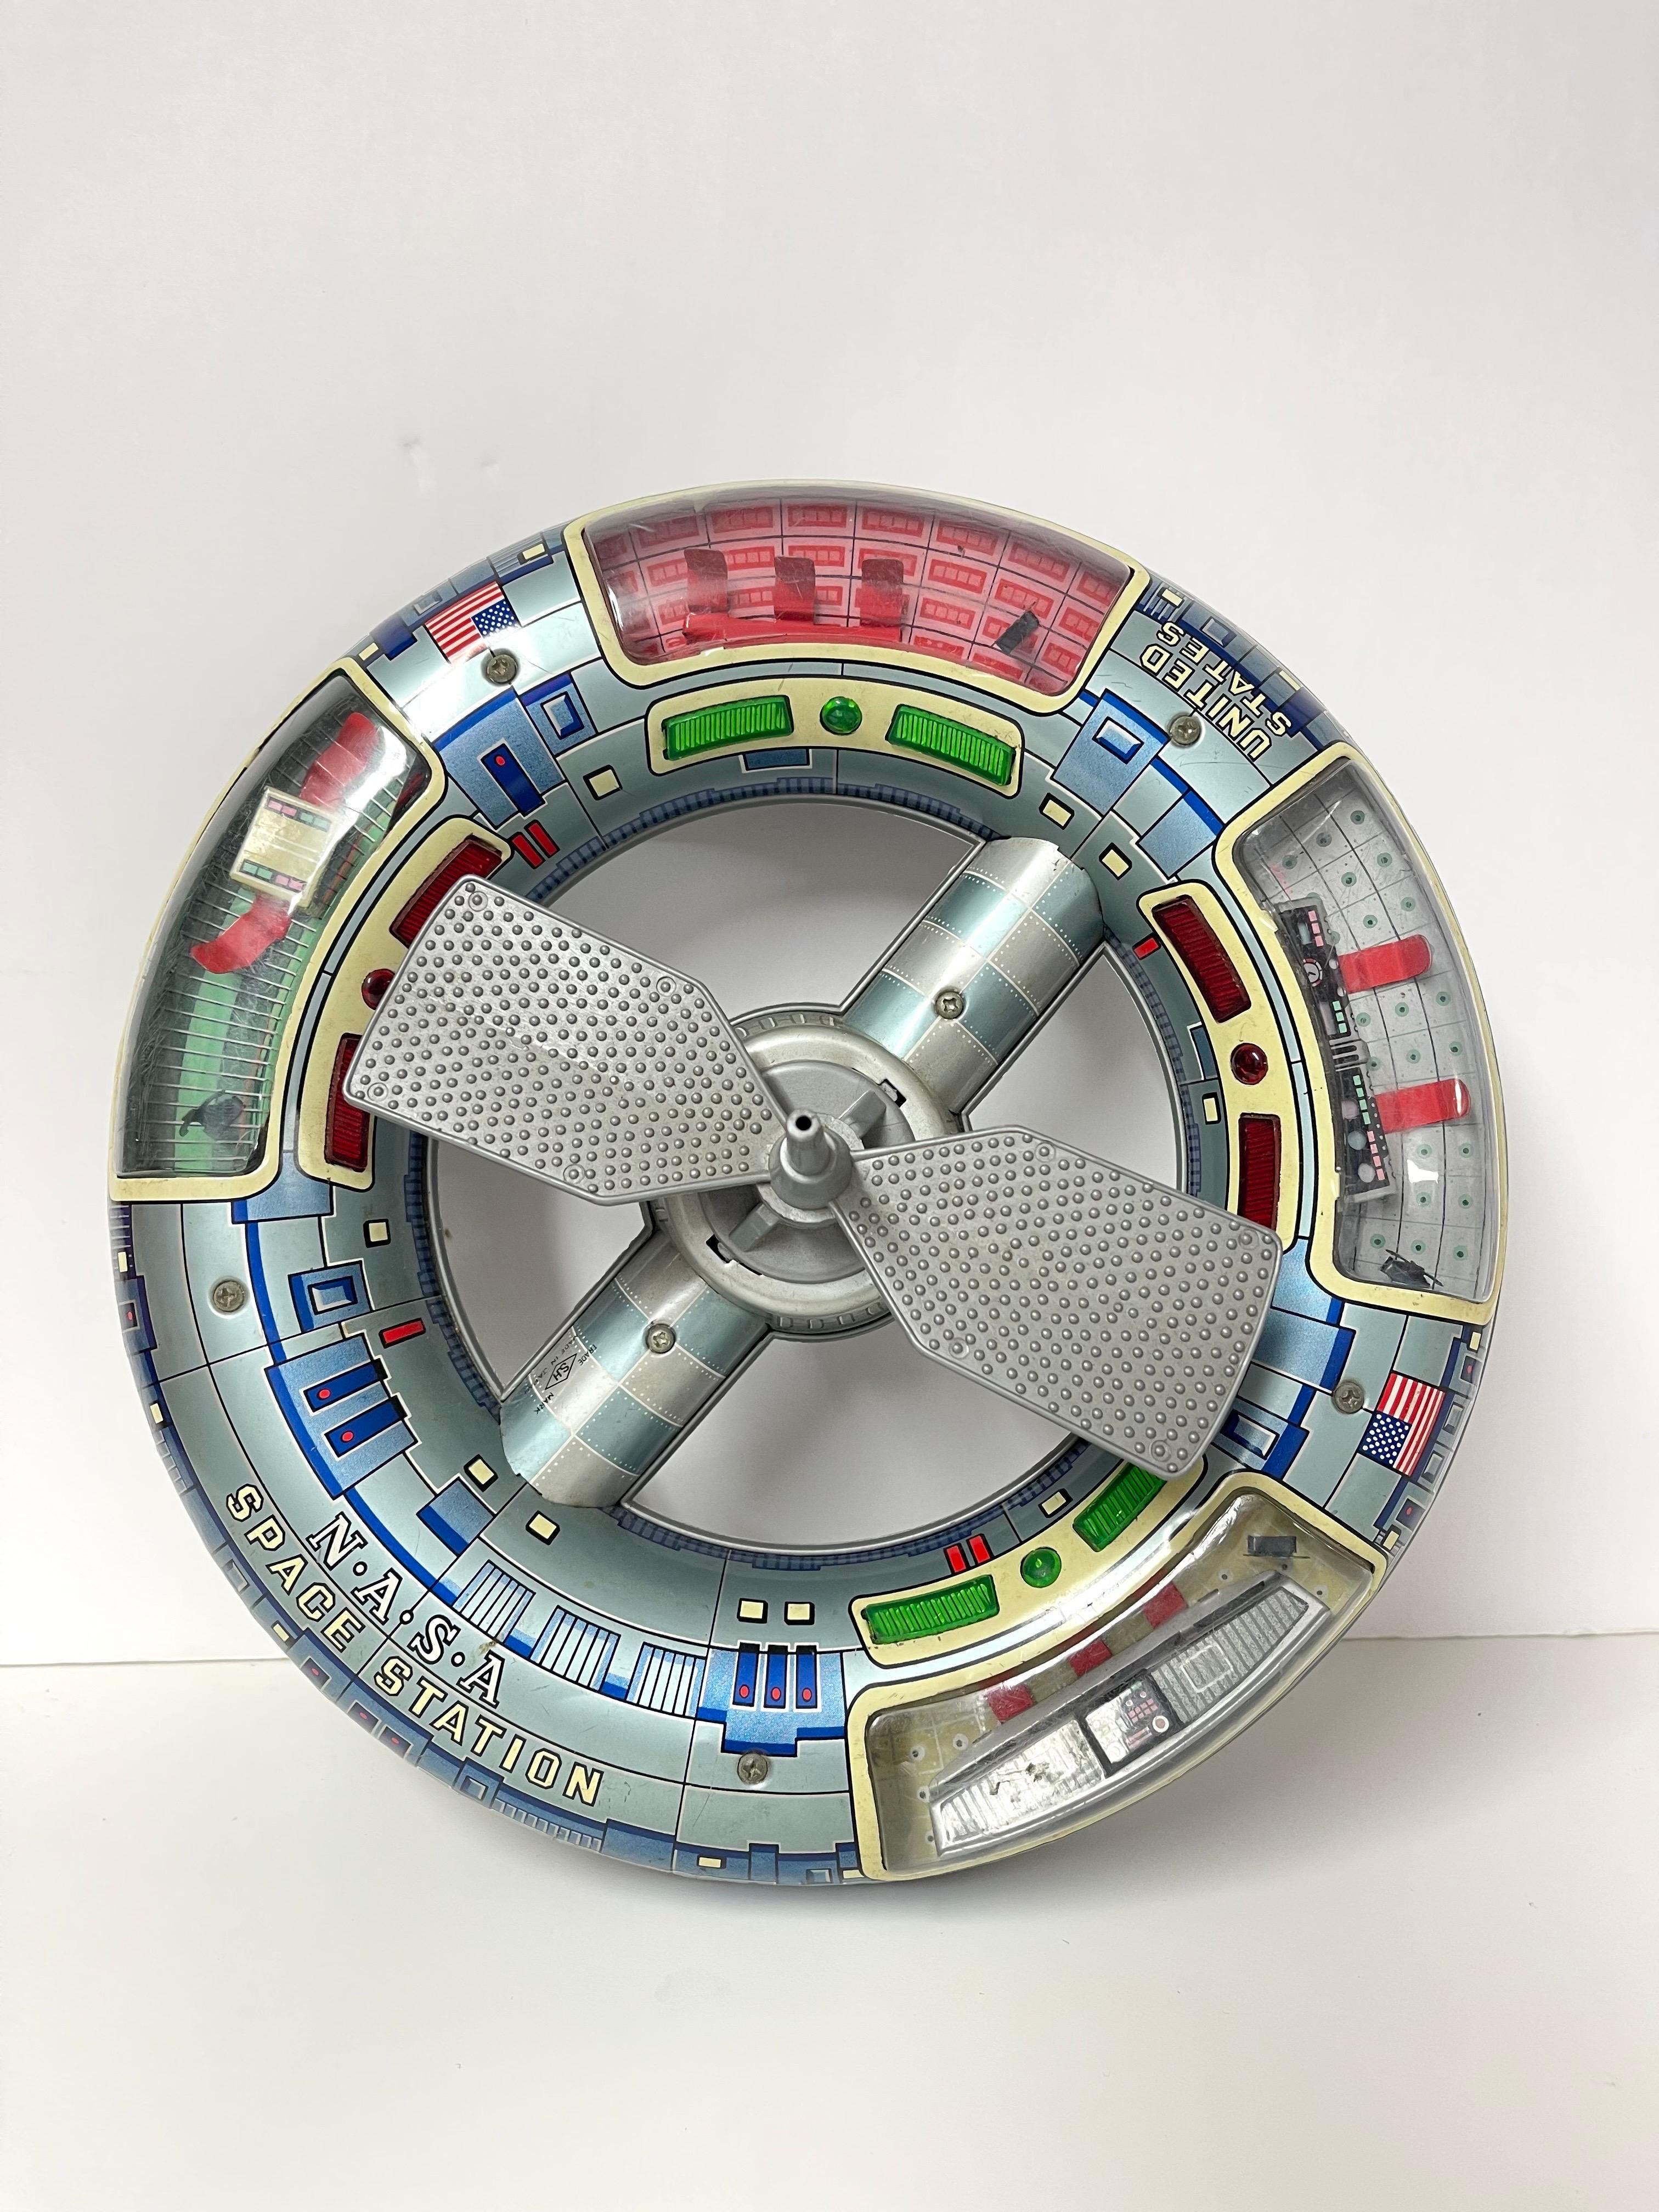 Rare and Collectible 1960's Horikawa Space Station Toy. Perfect for that space age toy collector. Tin Lithograph sphere that says Nasa Space Station on the side with plastic molded interior and original gray antenna. Missing top red radar piece,